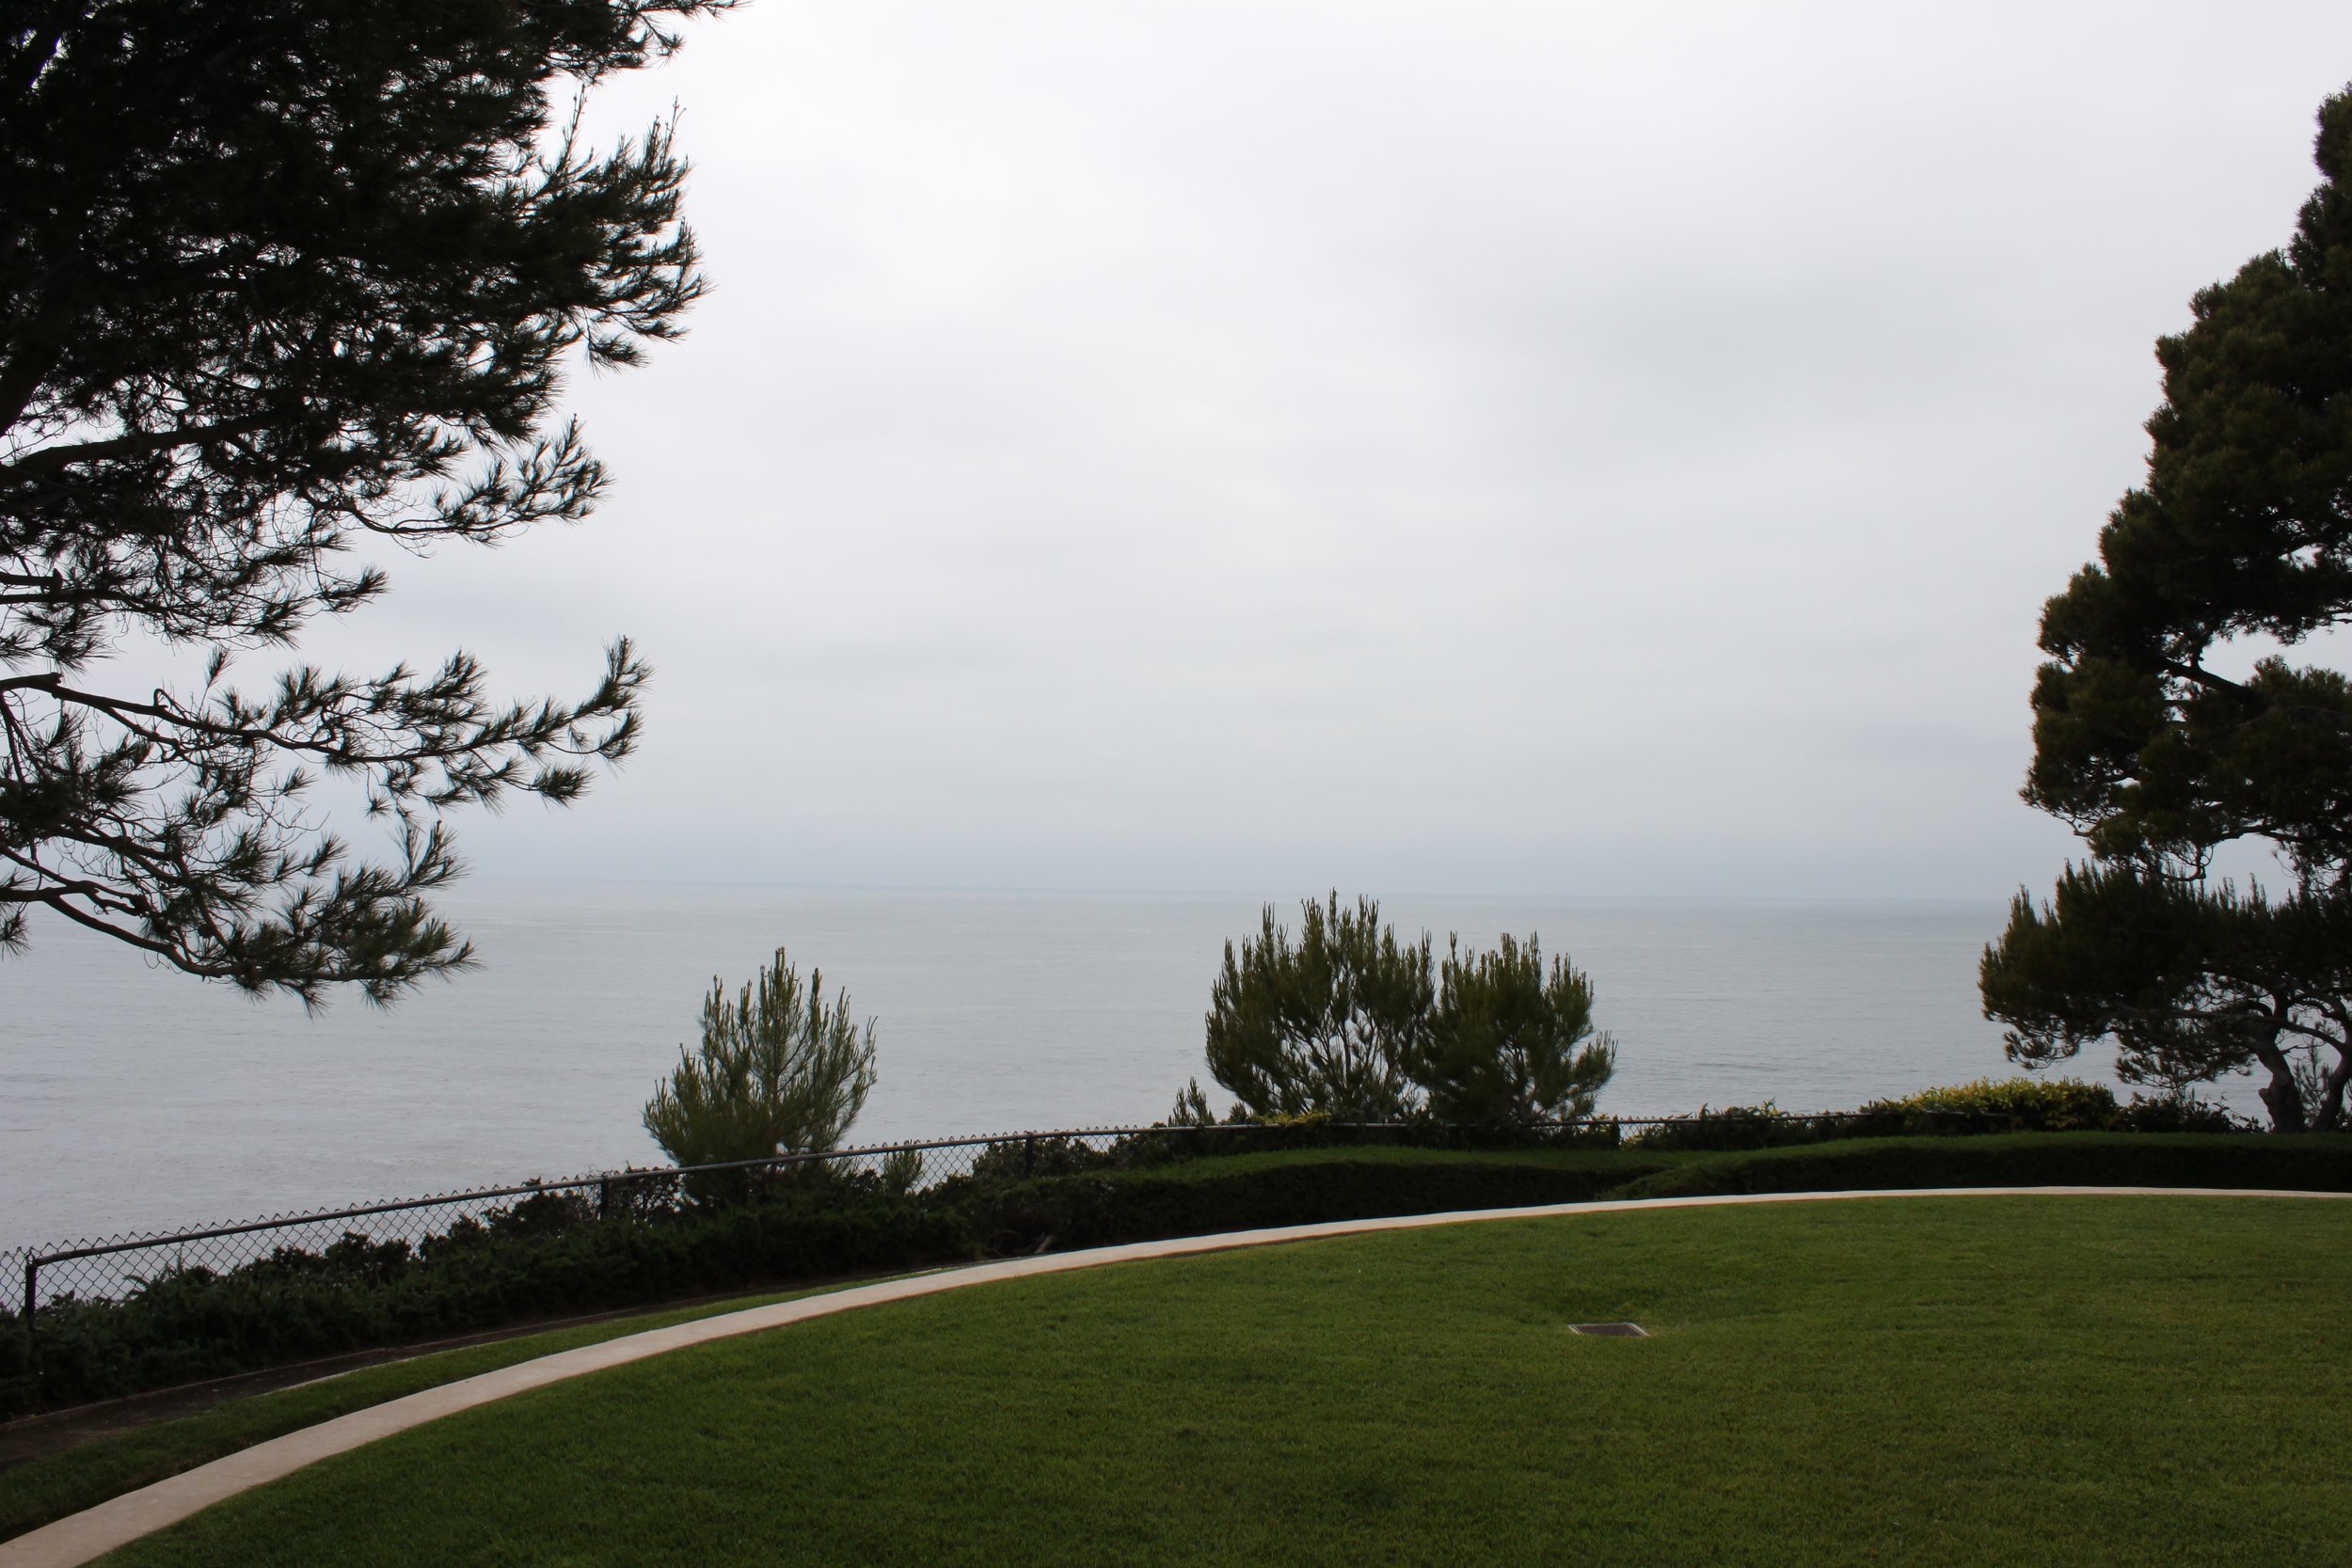 A view of the water beyond the manicured lawn is seen on an over-cased grey day.